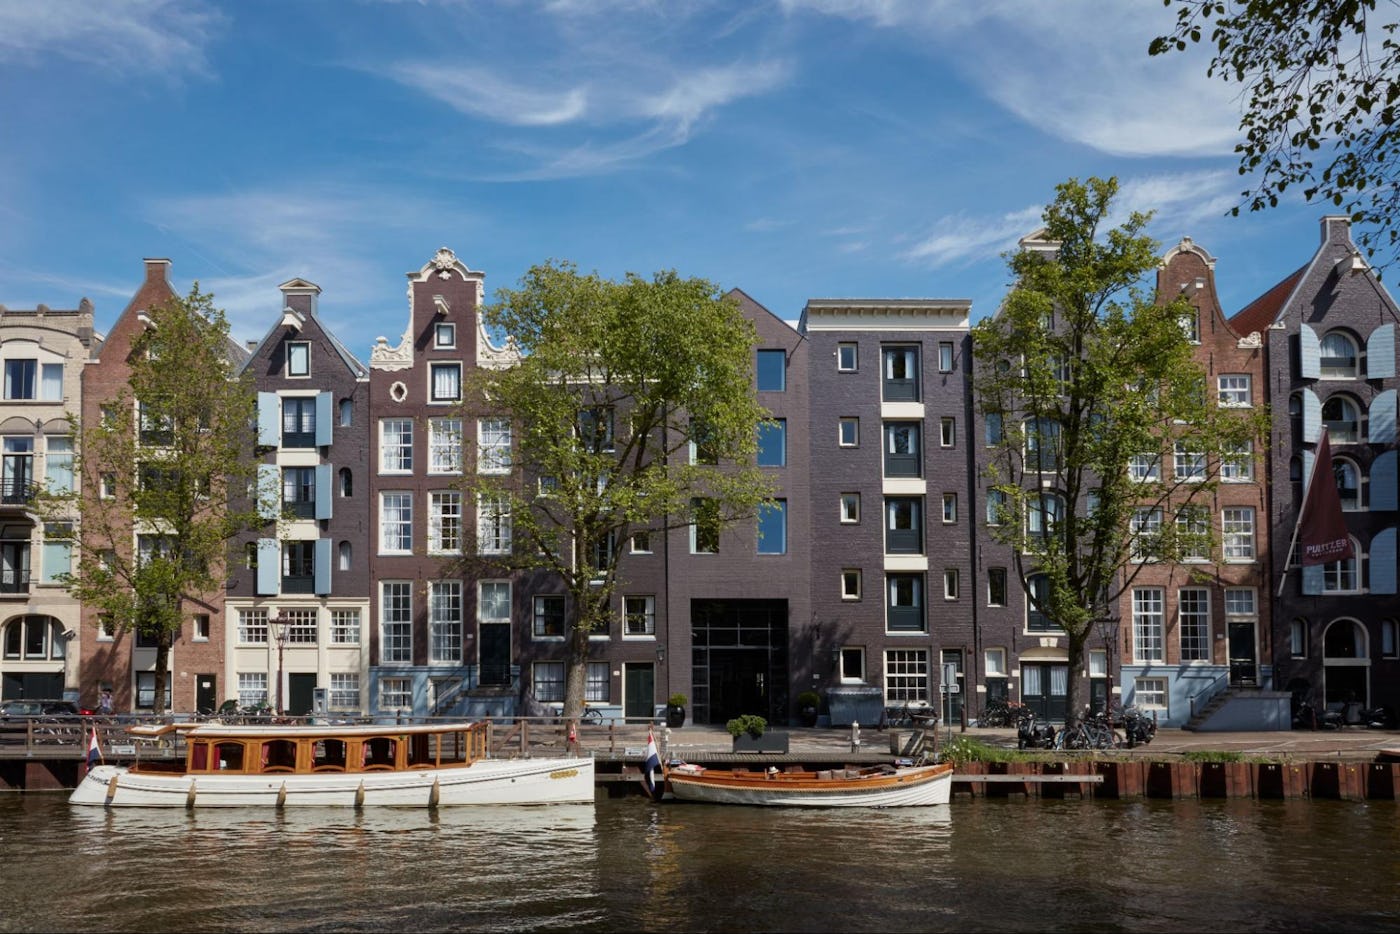 Traditional Dutch buildings line a calm canal with boats moored along the side on a sunny day in Amsterdam.